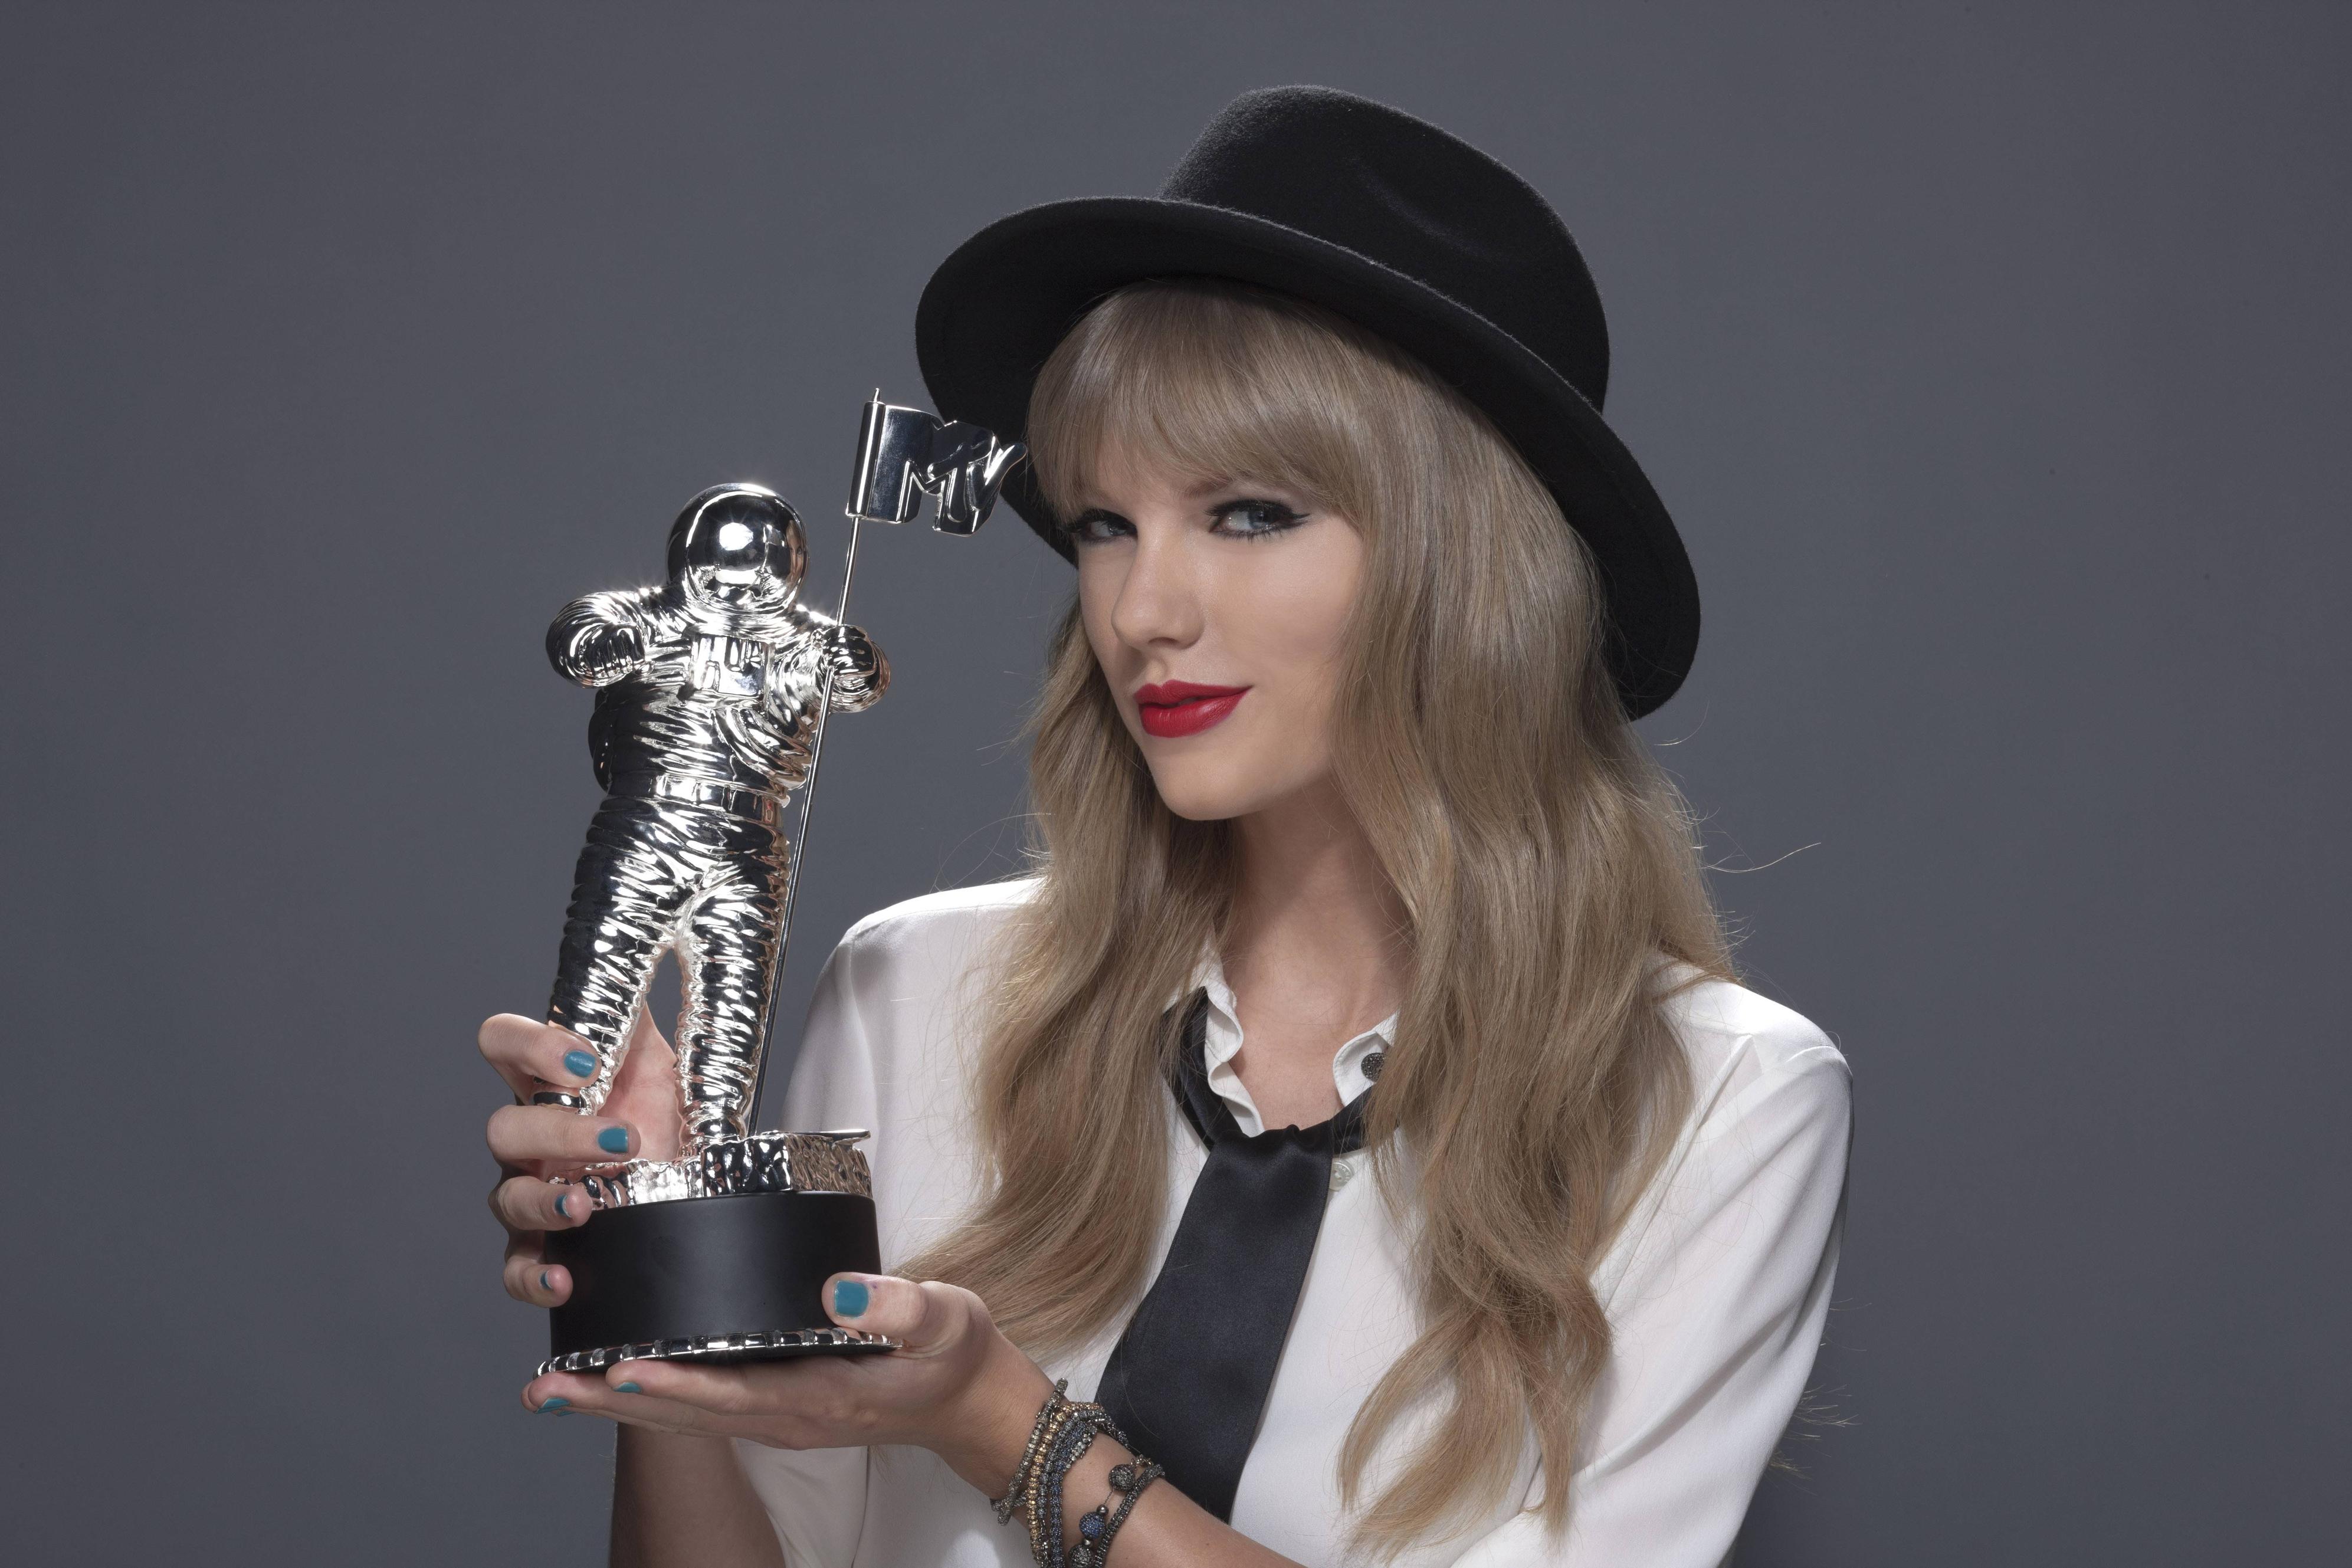 http://www.taylorpictures.net/albums/photoshoots/2012/mtvvideomusicawards/002.jpg